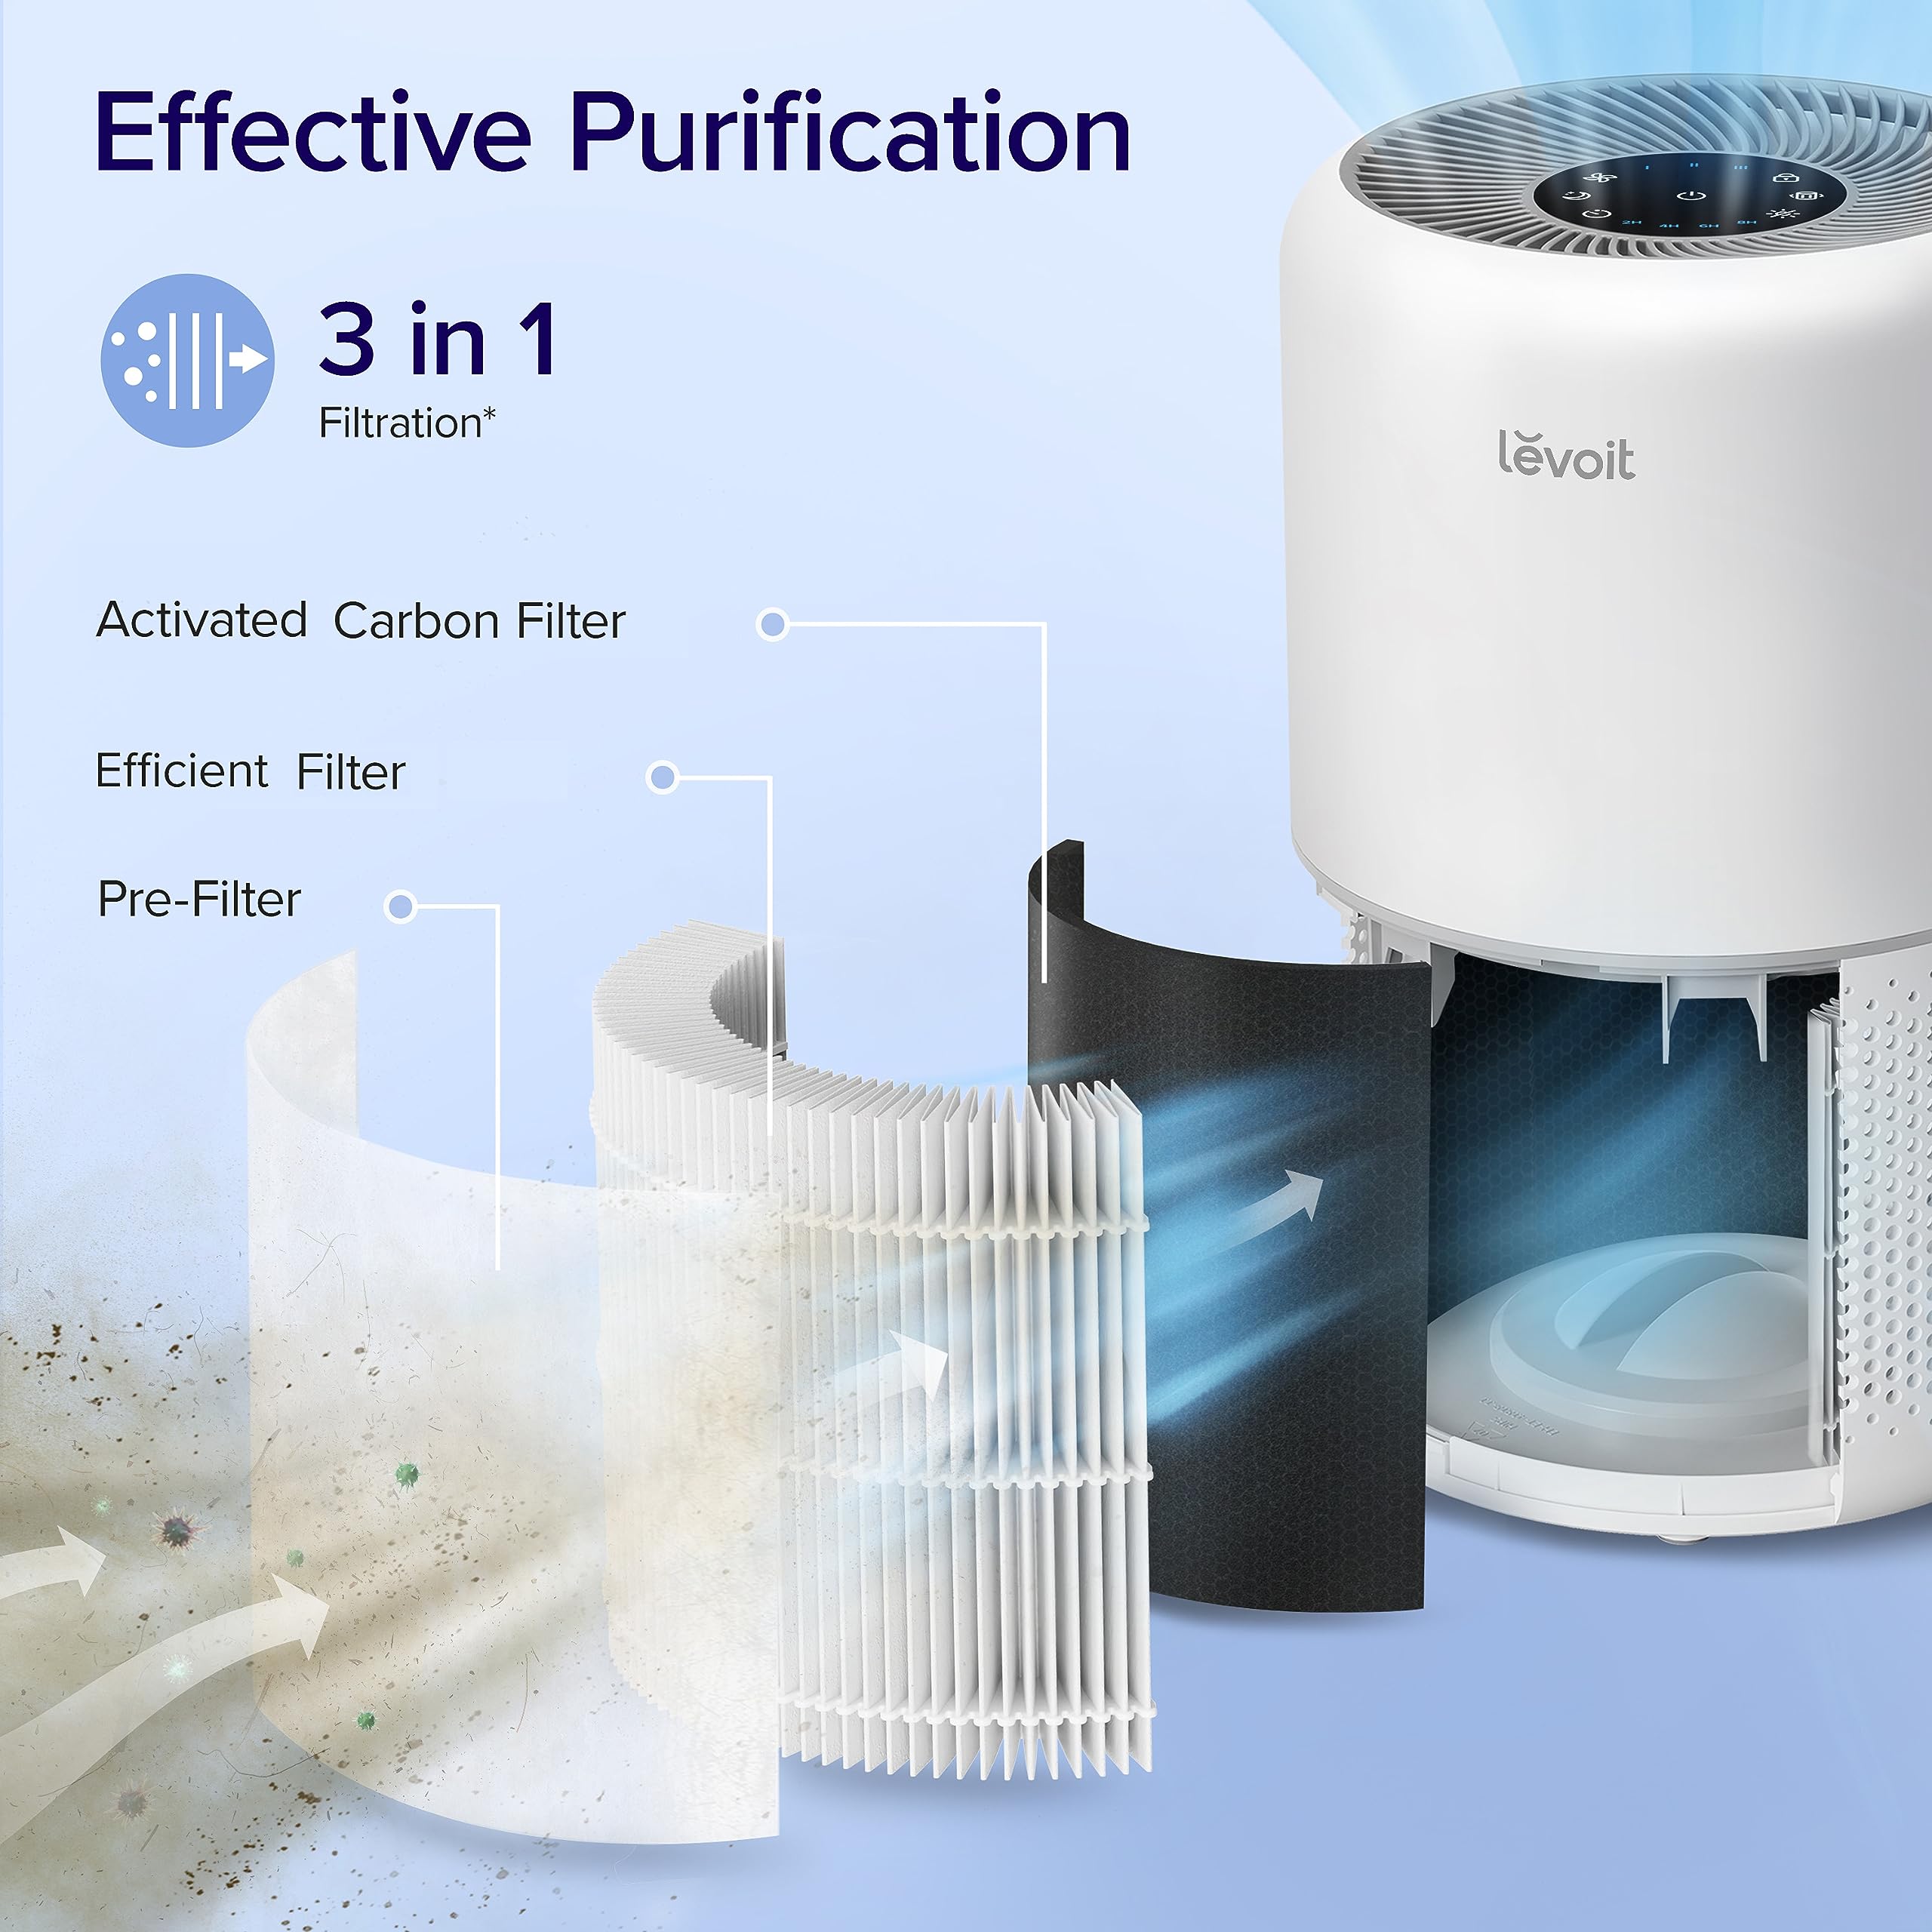 LEVOIT Air Purifier for Home Allergies Pets Hair in Bedroom, HEPA Filter, Covers Up to 1095 Sq.Foot Powered by 33W High Torque Motor, Remove Dust Smoke Pollutants, 0.3 Microns, Core 300, White